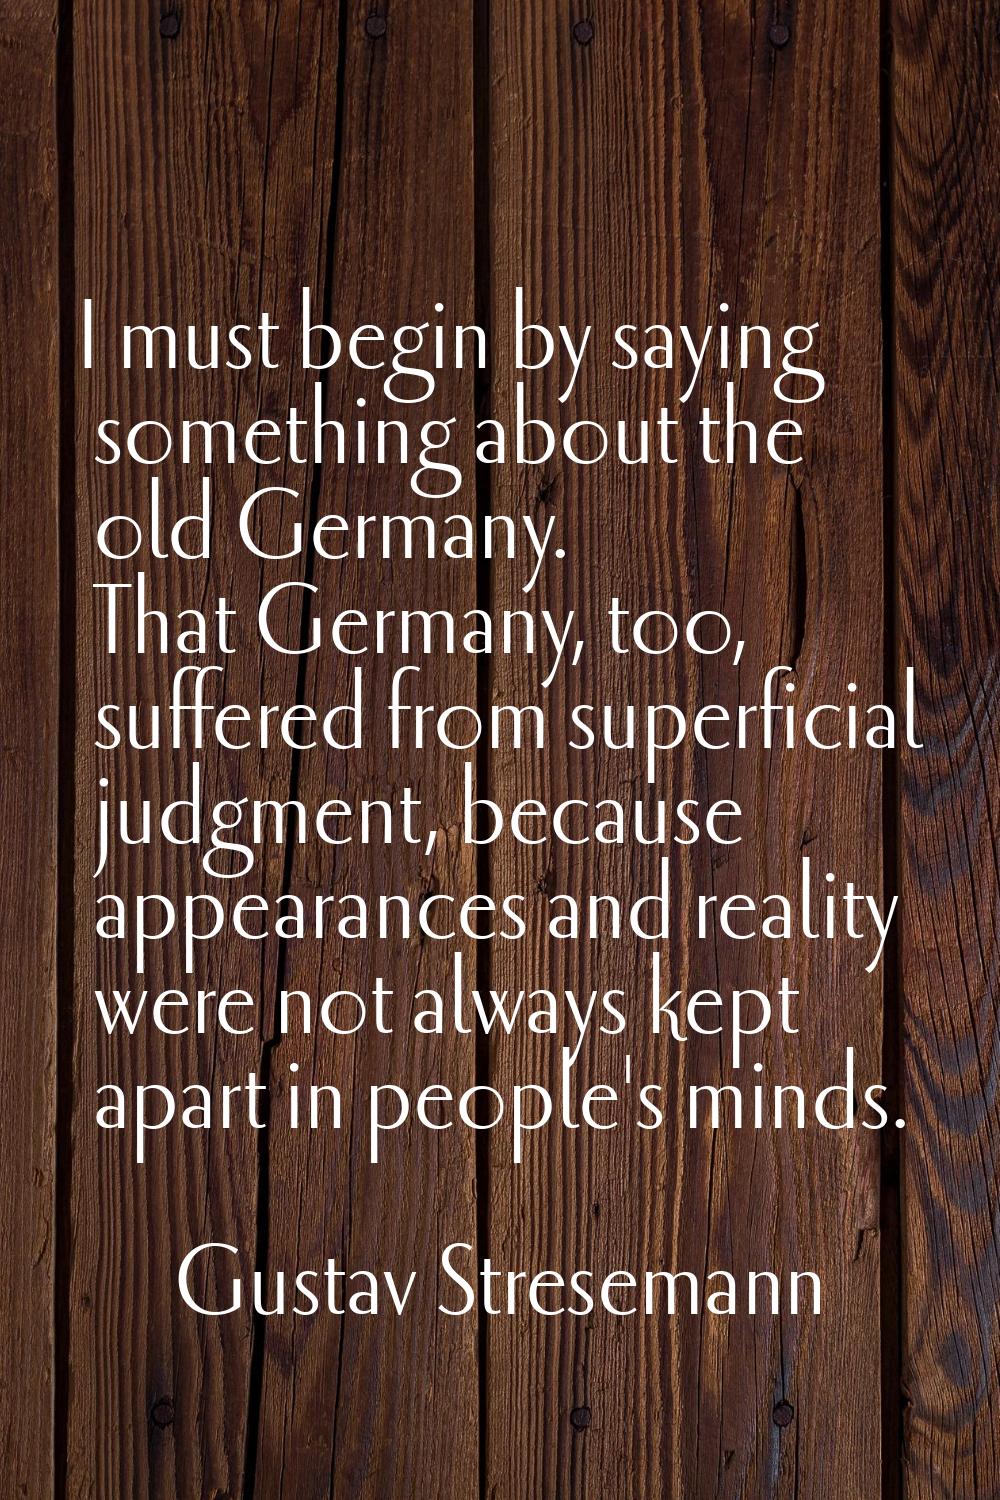 I must begin by saying something about the old Germany. That Germany, too, suffered from superficia